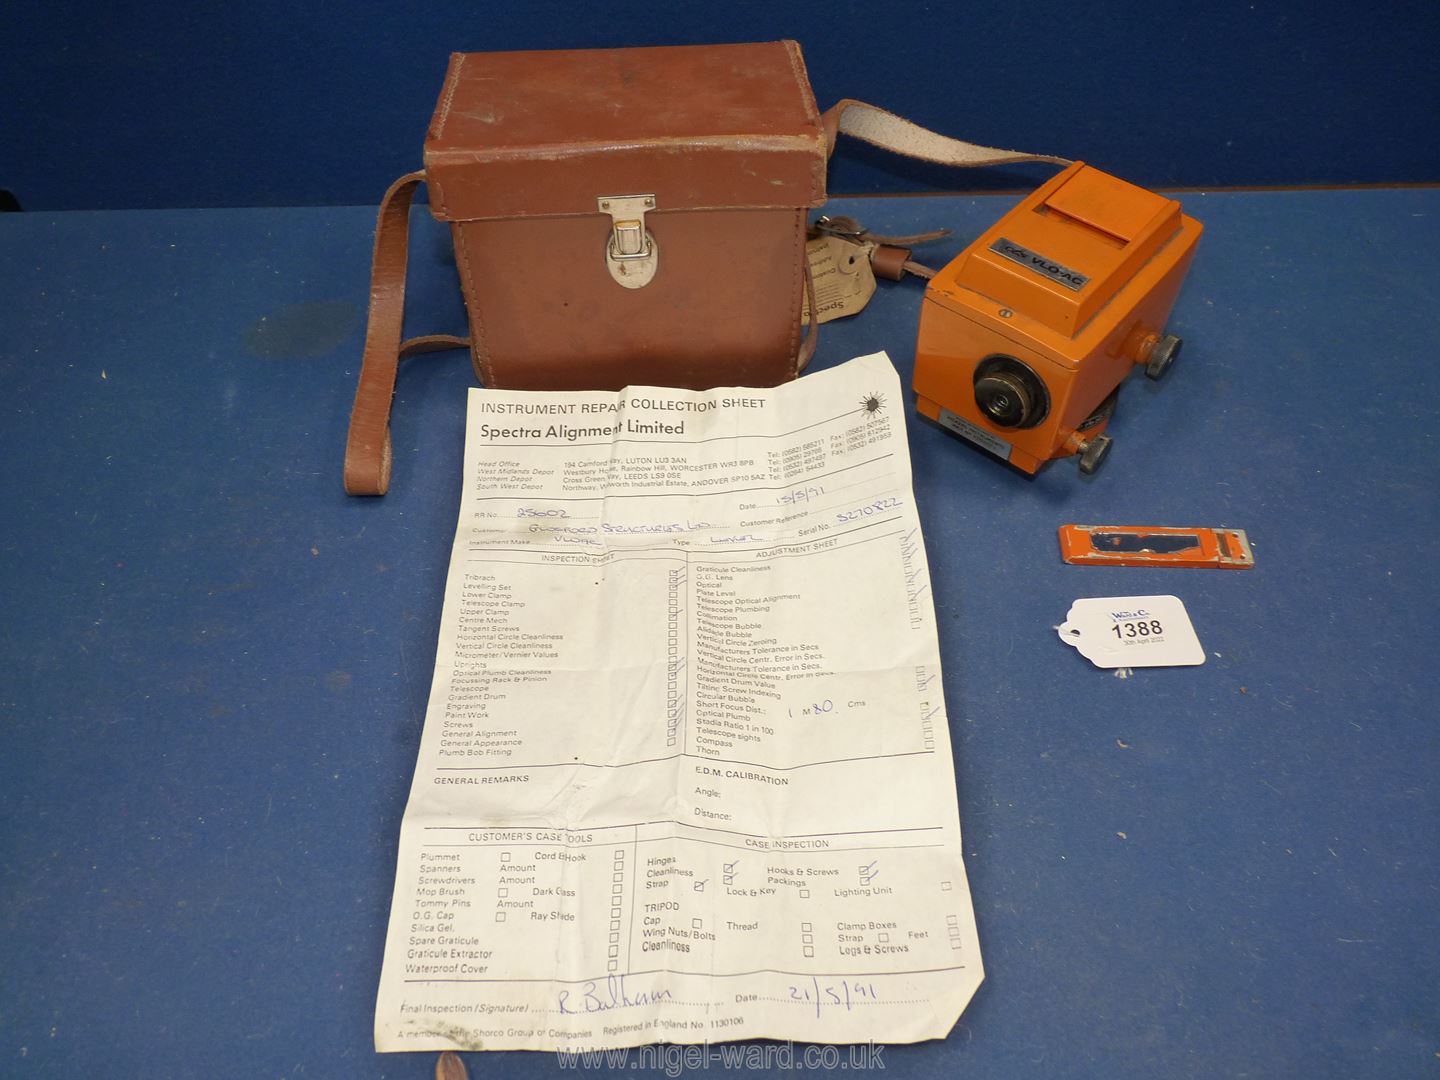 A Vickers Instruments VCTS VLO-AC Surveying Instrument with leather case.